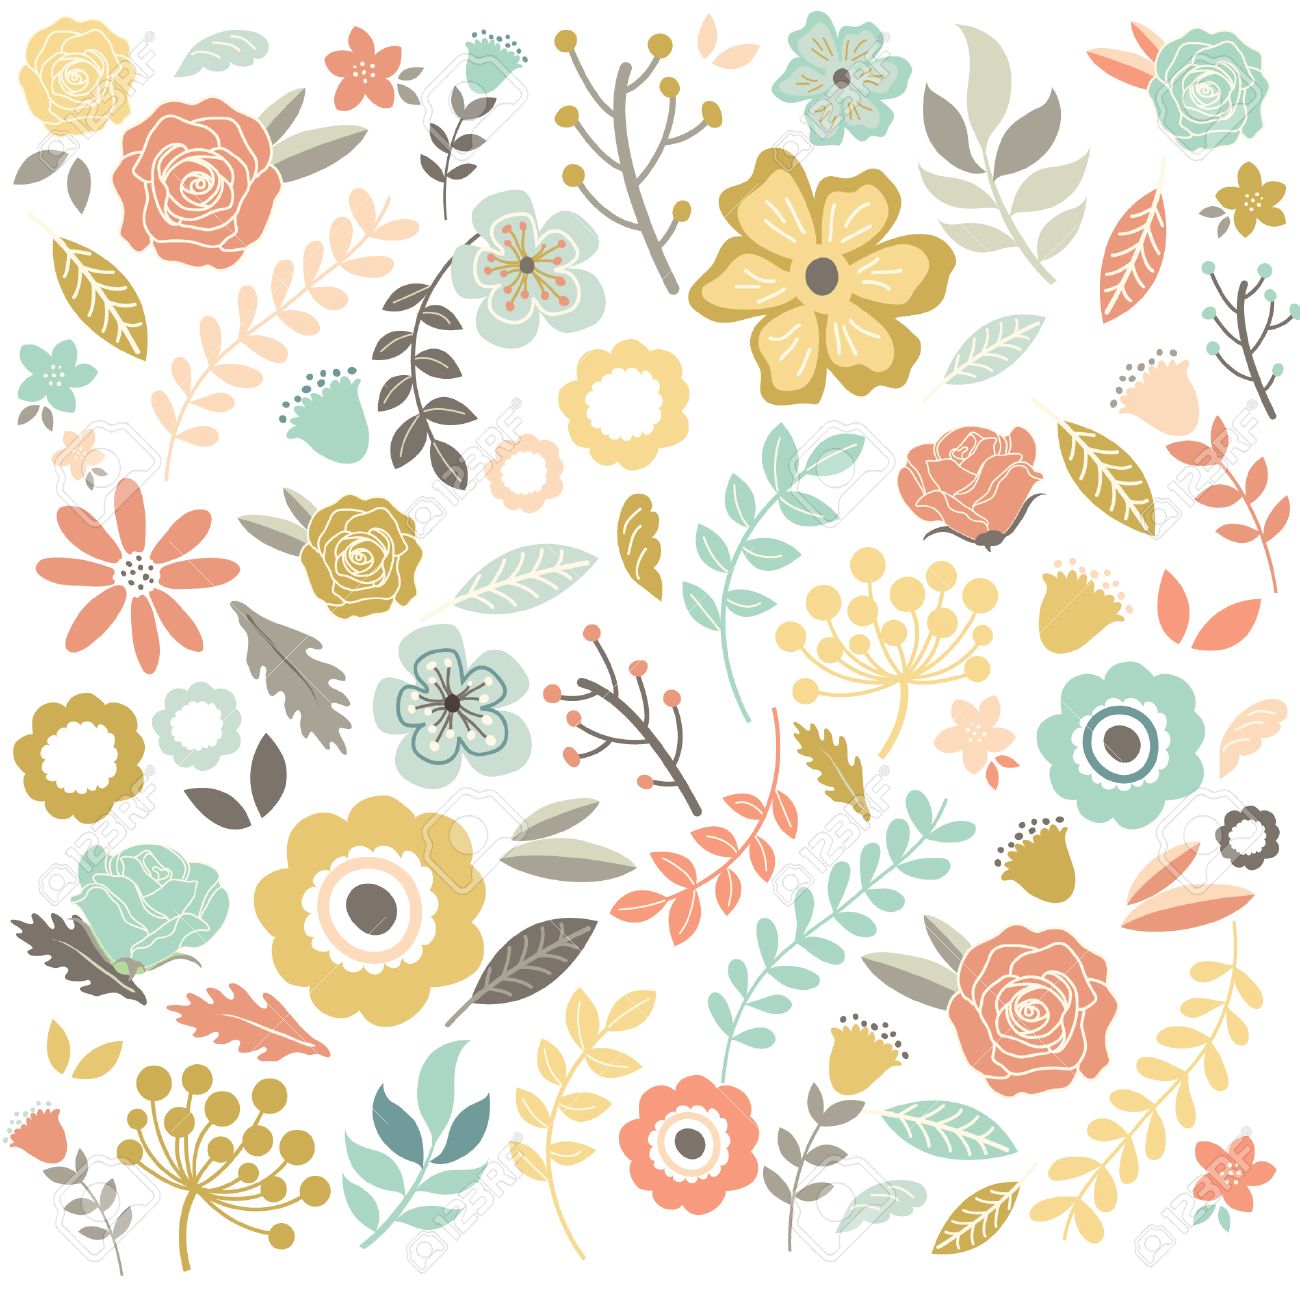 Free download Vintage Hand Drawn Flowers Background Royalty SVG